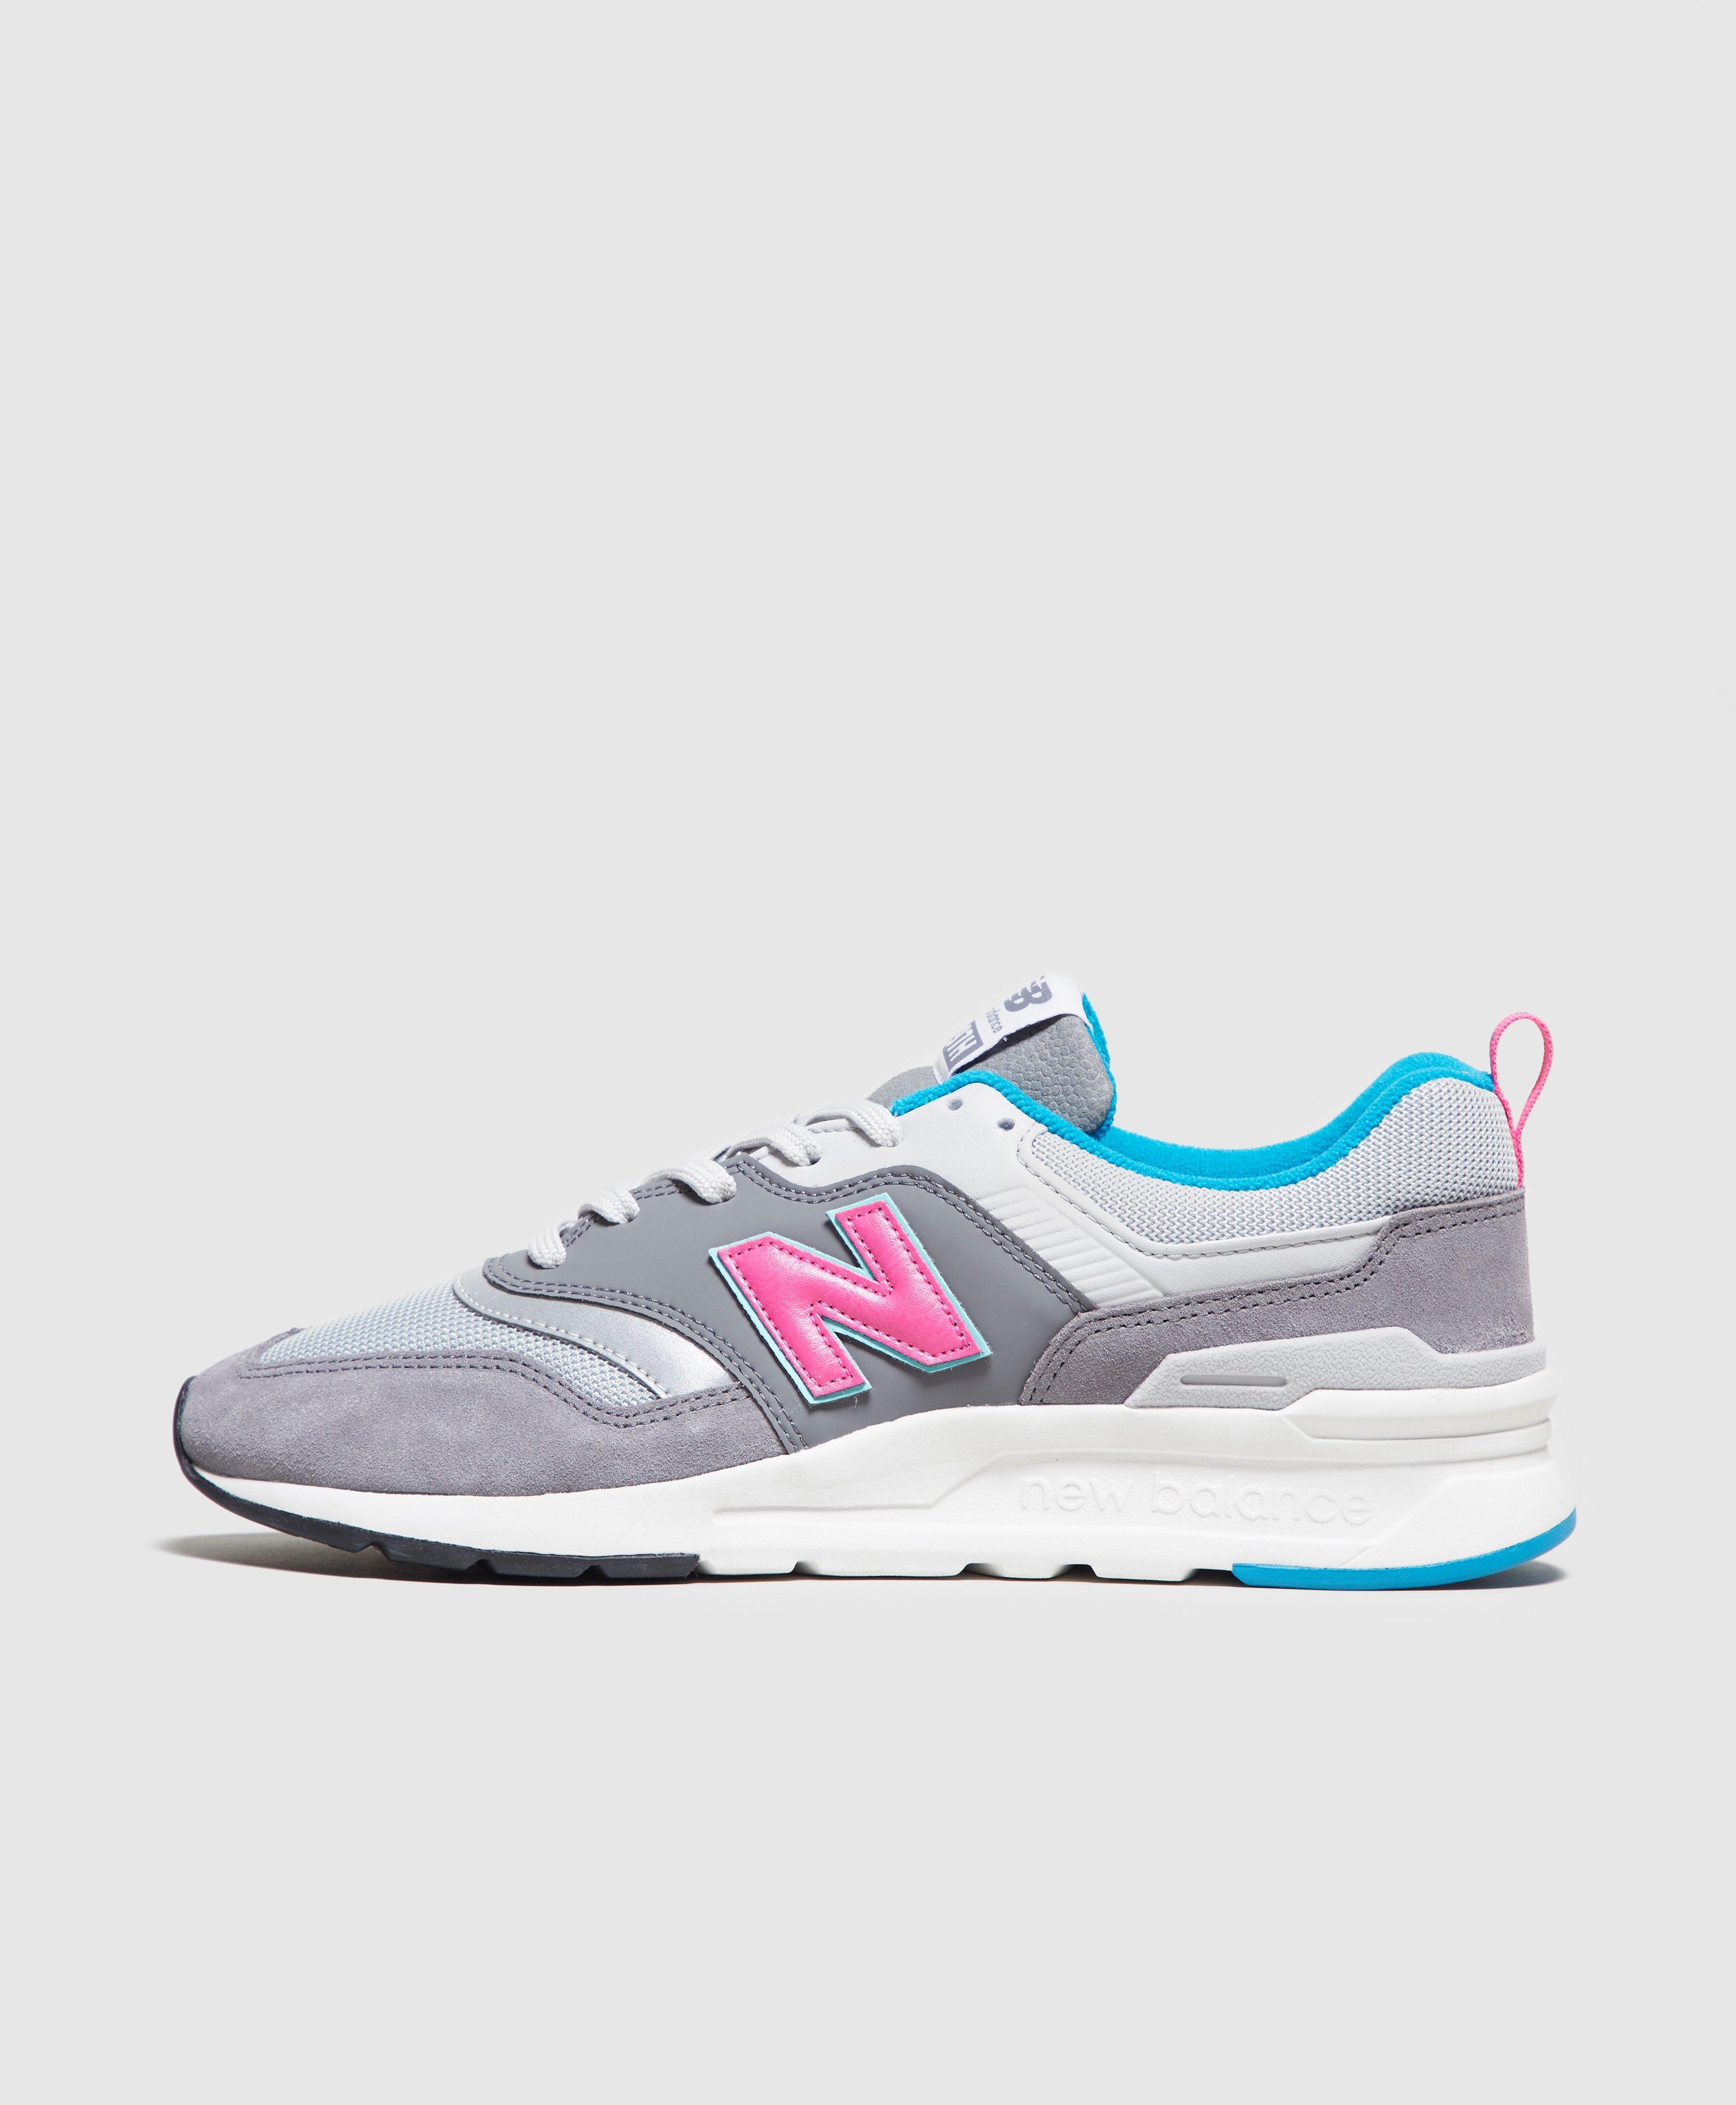 New Balance 997h in Gray for Men - Lyst